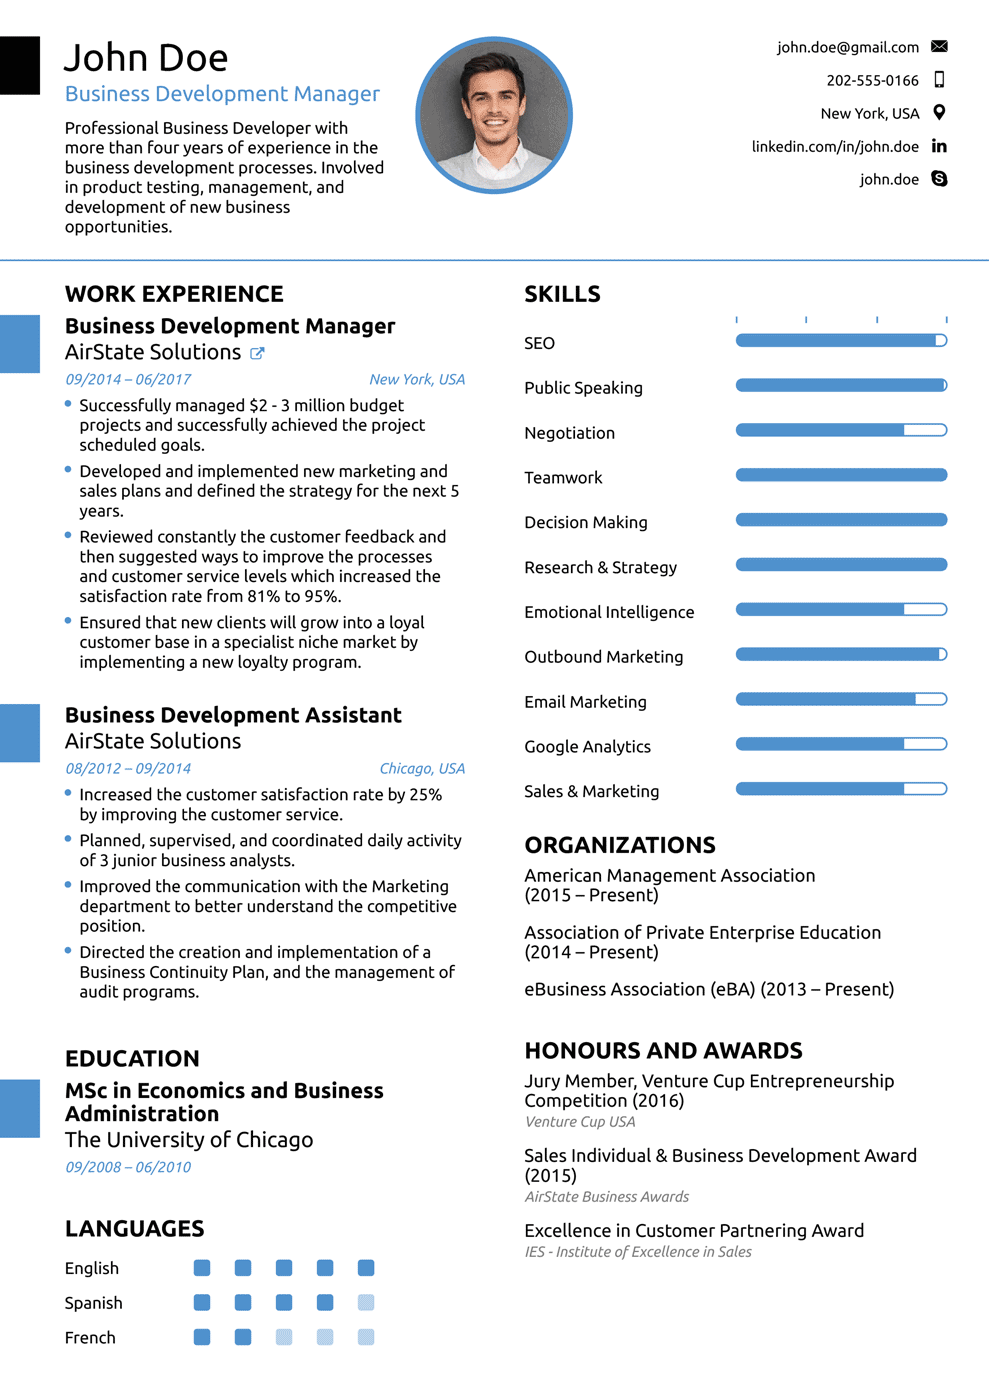 8+ Best Online Resume Templates of 2018 [Download & Customize]